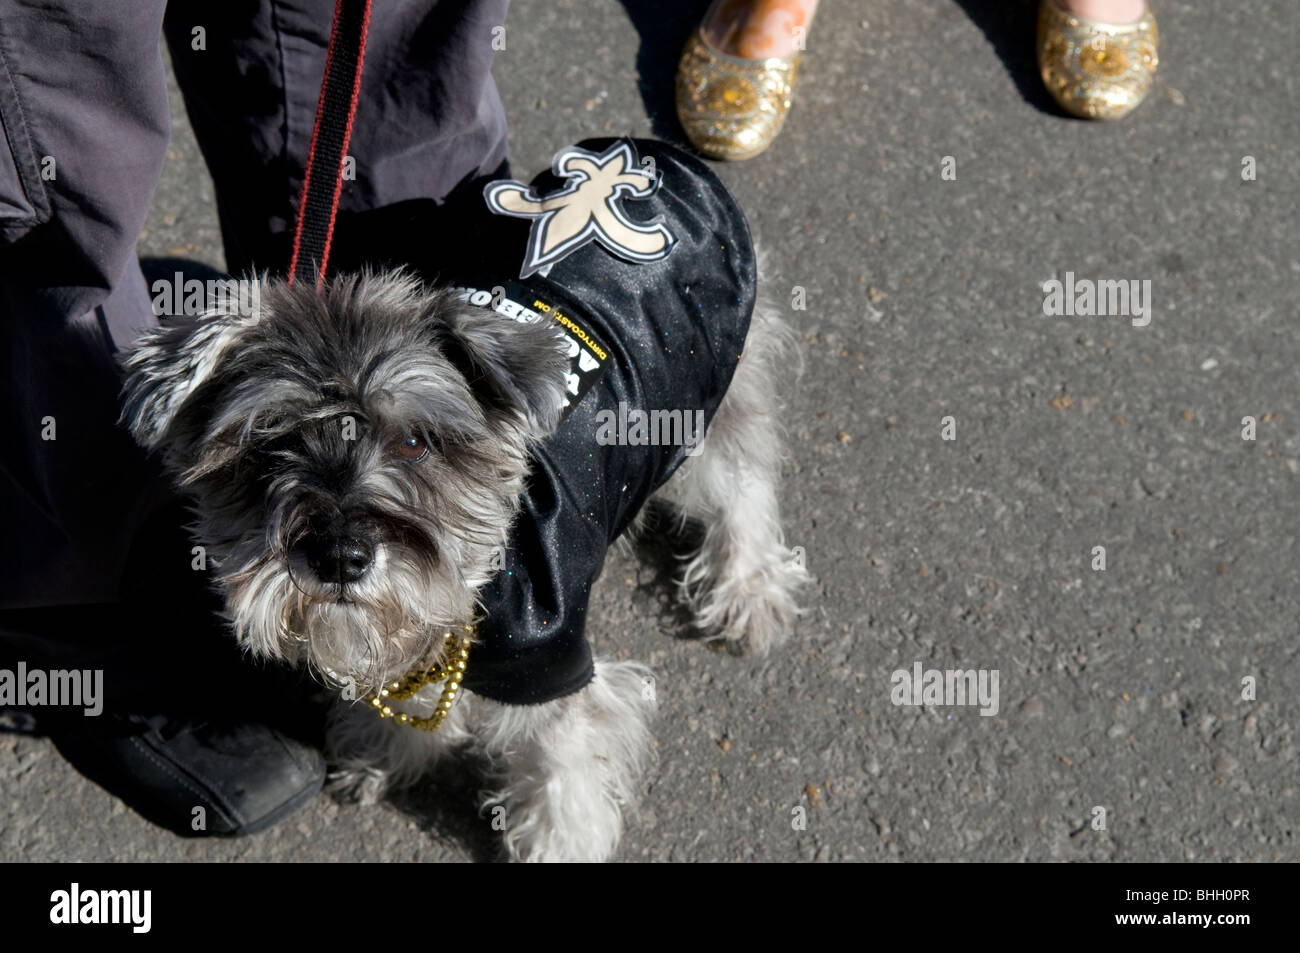 Dog in Saints costume in New Orleans, Louisiana, Saints Super Bowl XLIV Weekend Stock Photo